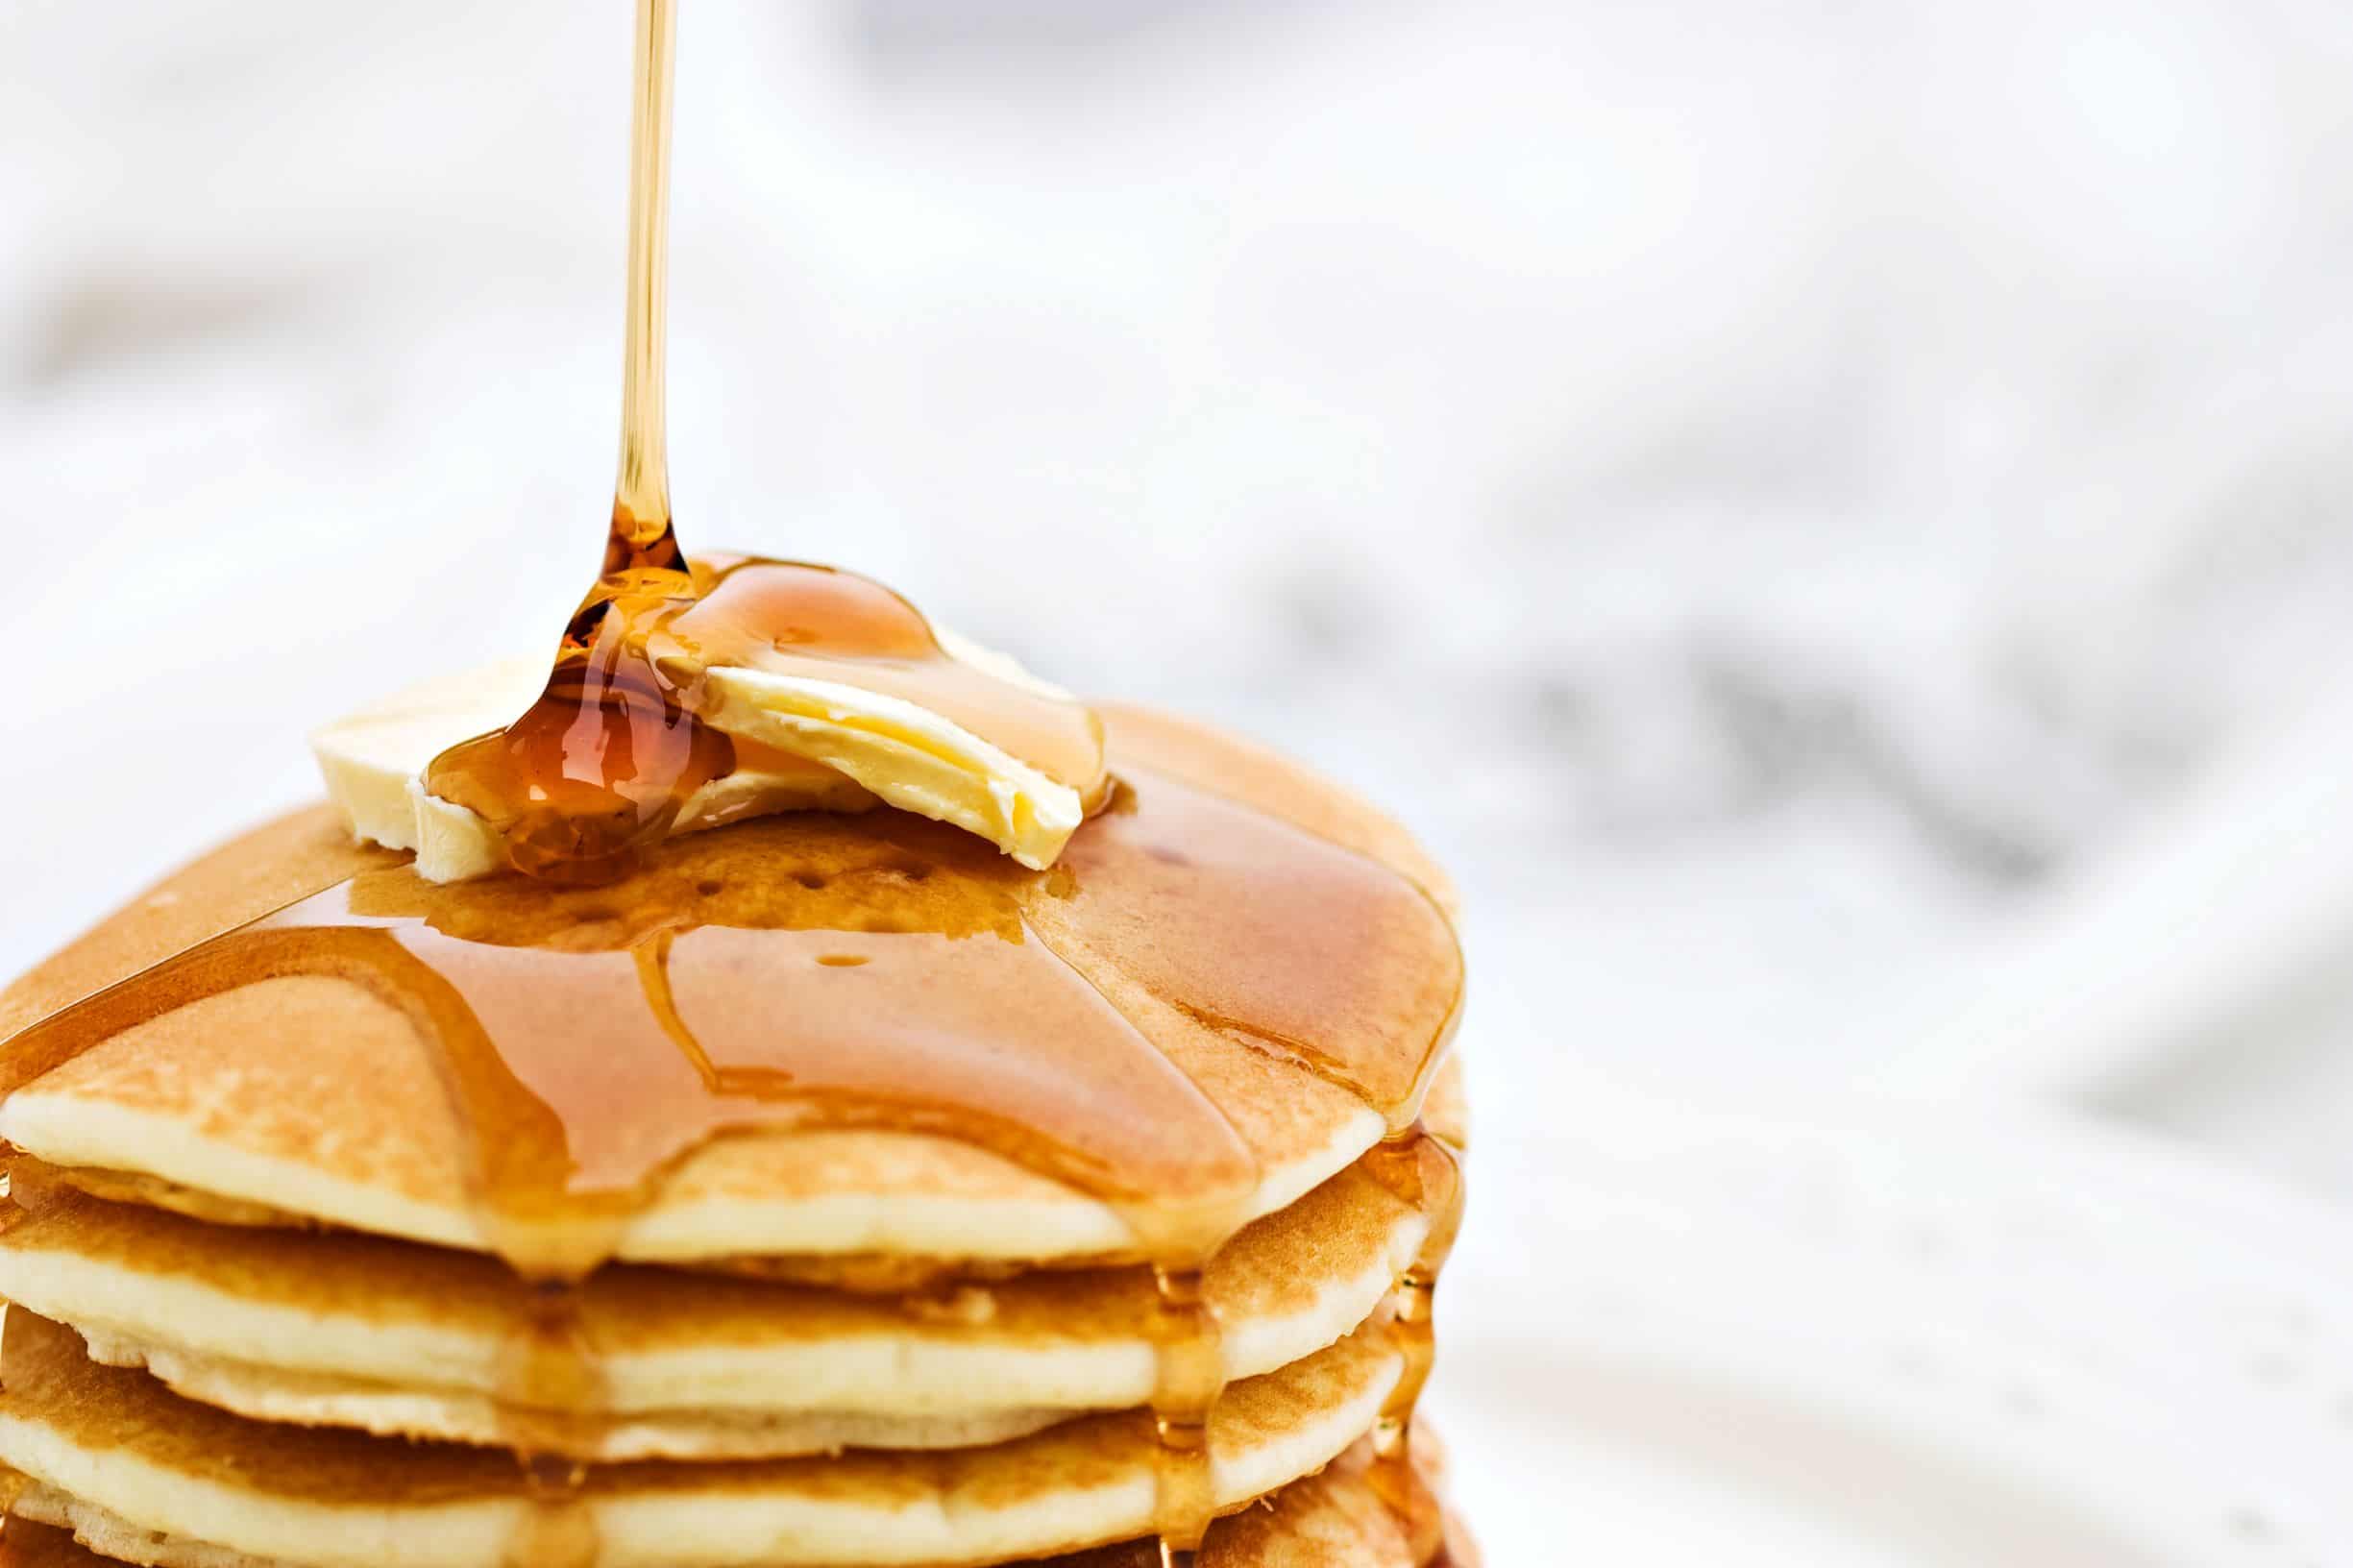 Syrup on Pancakes